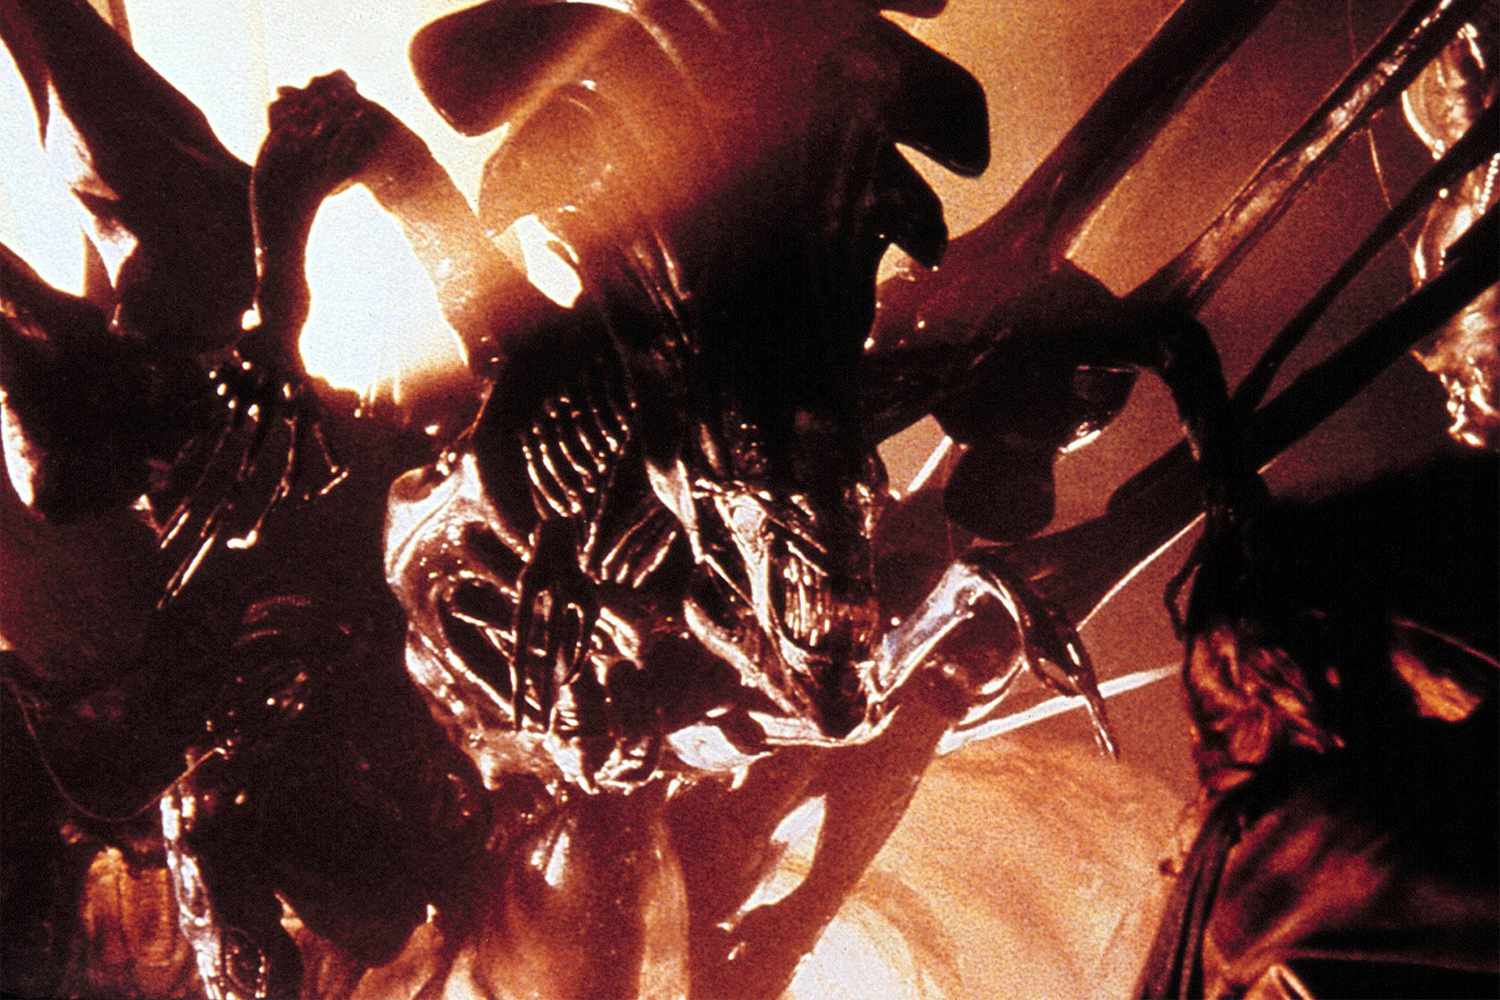 ALIENS, alien queen/mother, Sigourney Weaver, Carrie Henn, 1986, TM & Copyright (c) 20th Century Fox Film Corp. All rights reserved. cREDIT: 20th Century Fox/Everett Collection